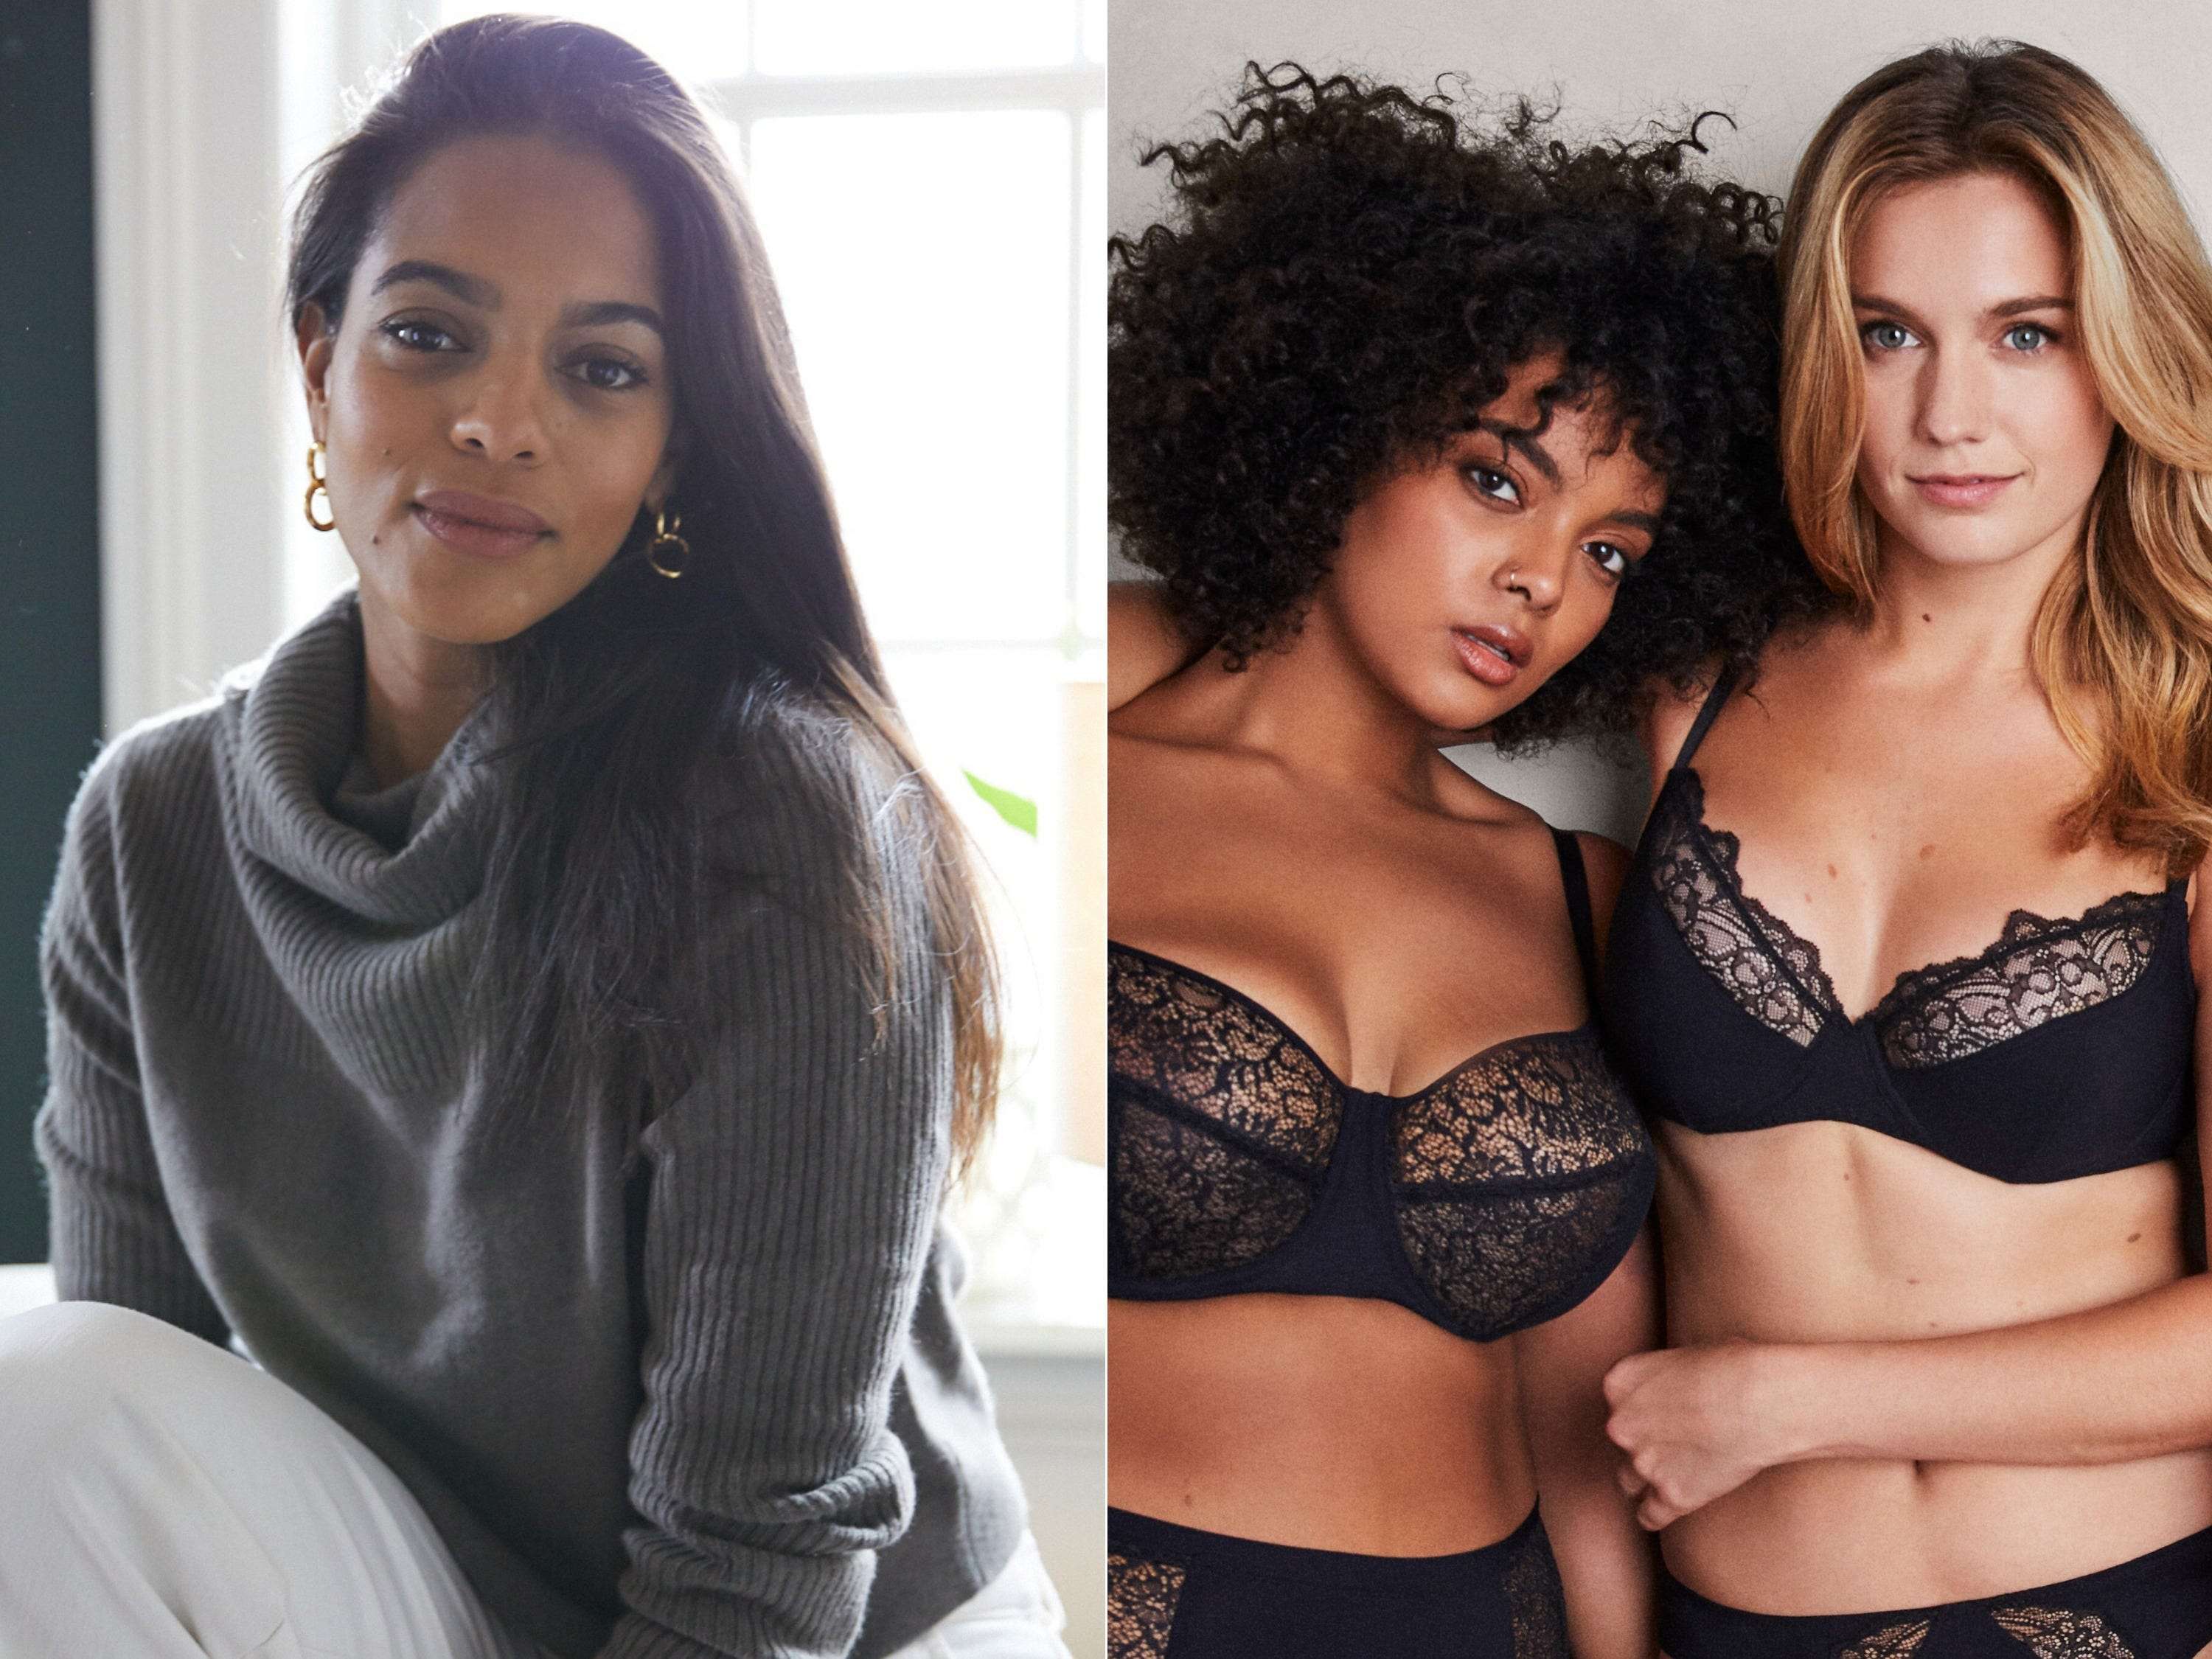 A former model created a lingerie line for sizes 32C to 38H after